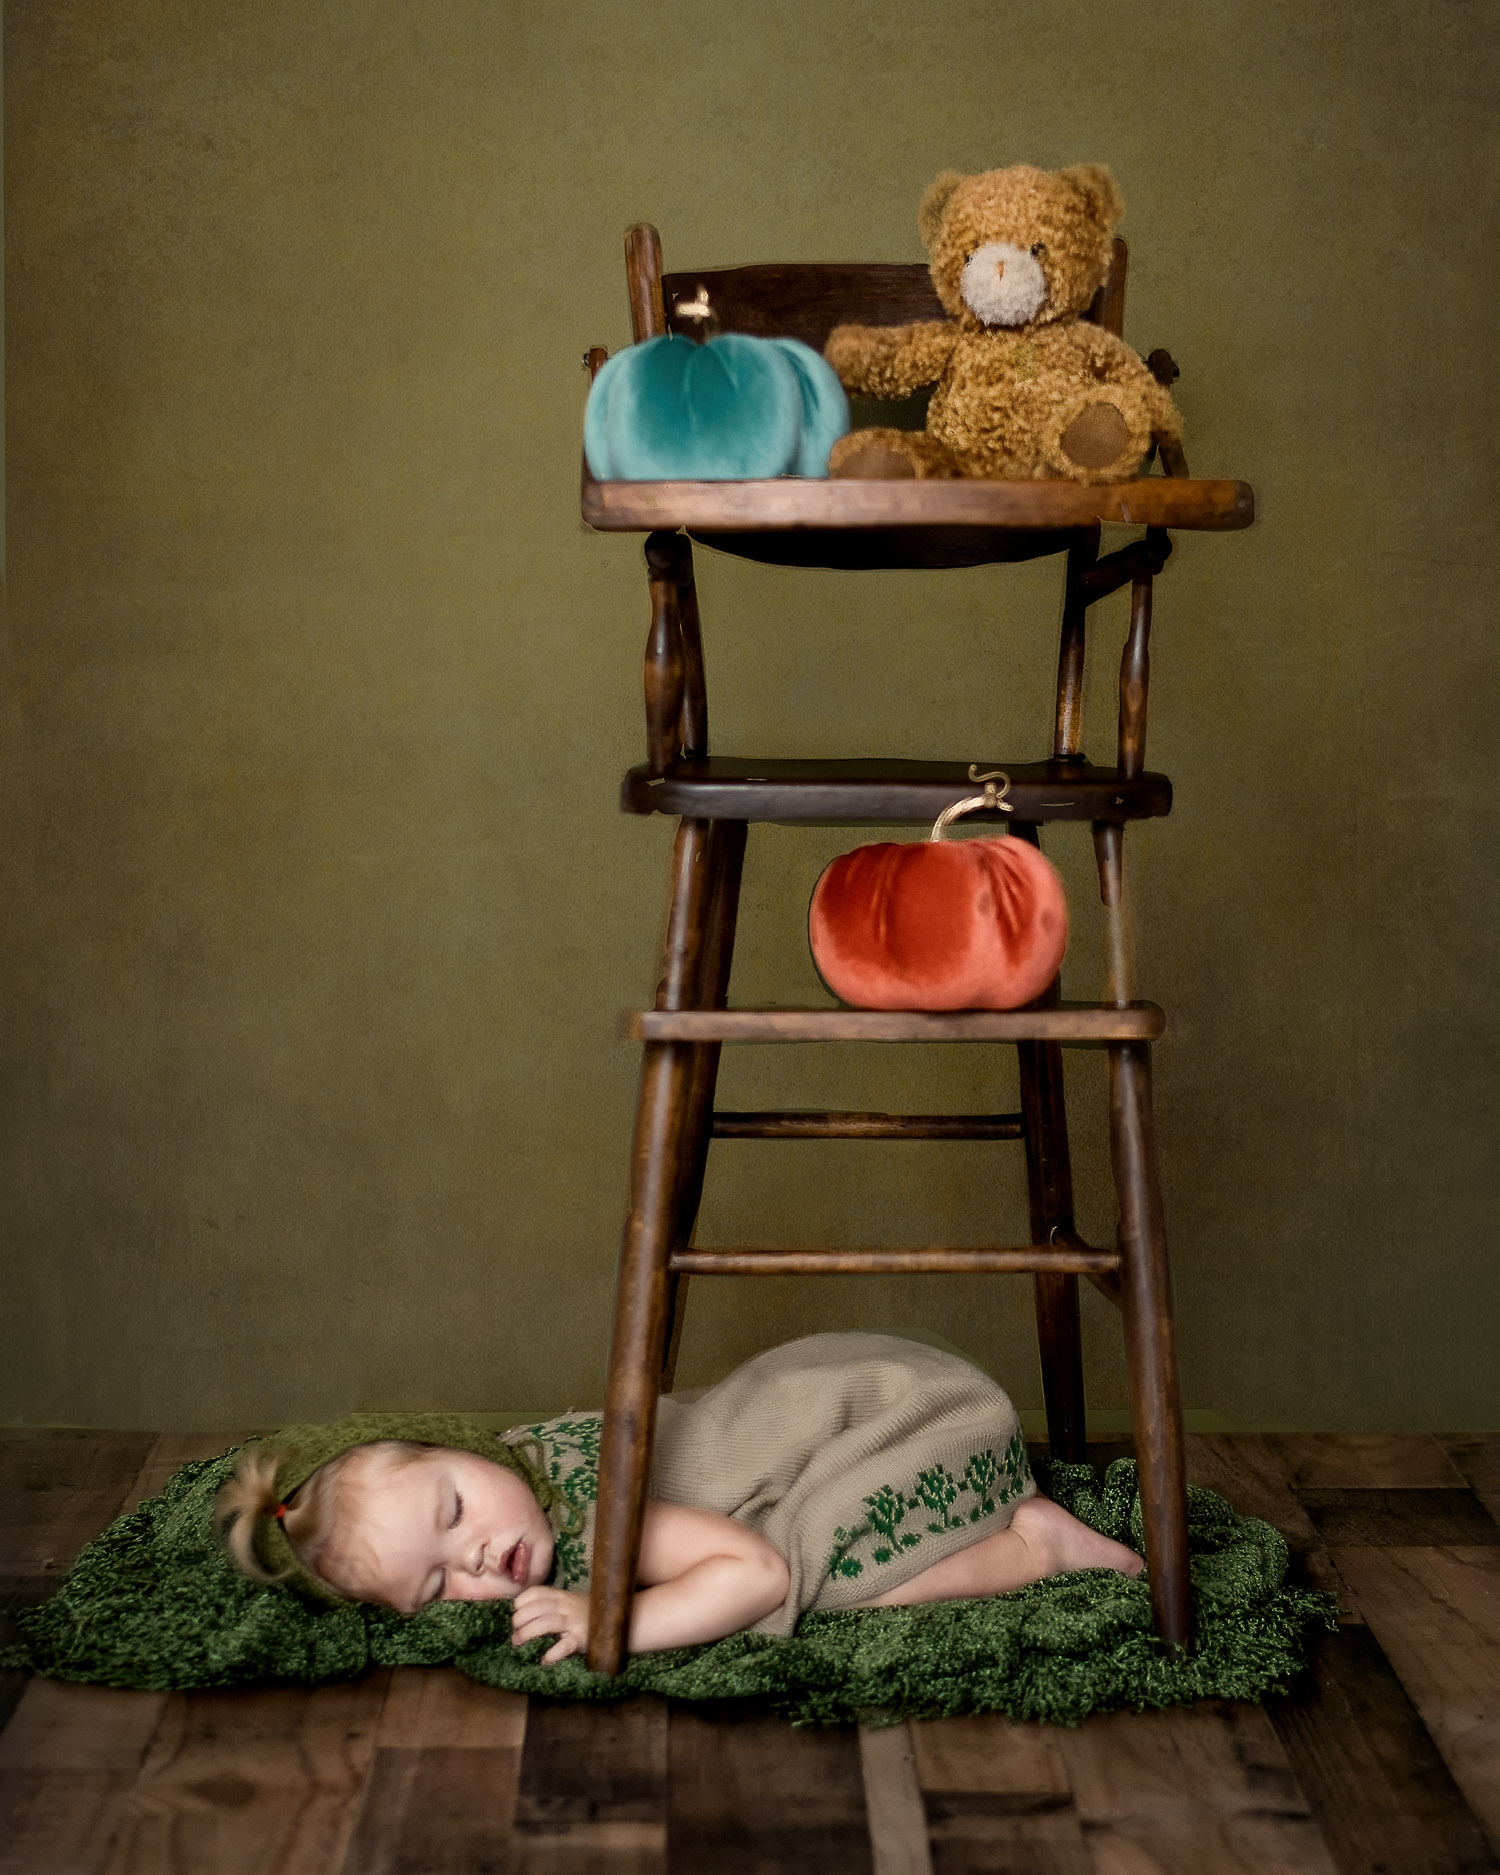 Toddler photography by Lisa Rowland at Perfect-Photos in Studio